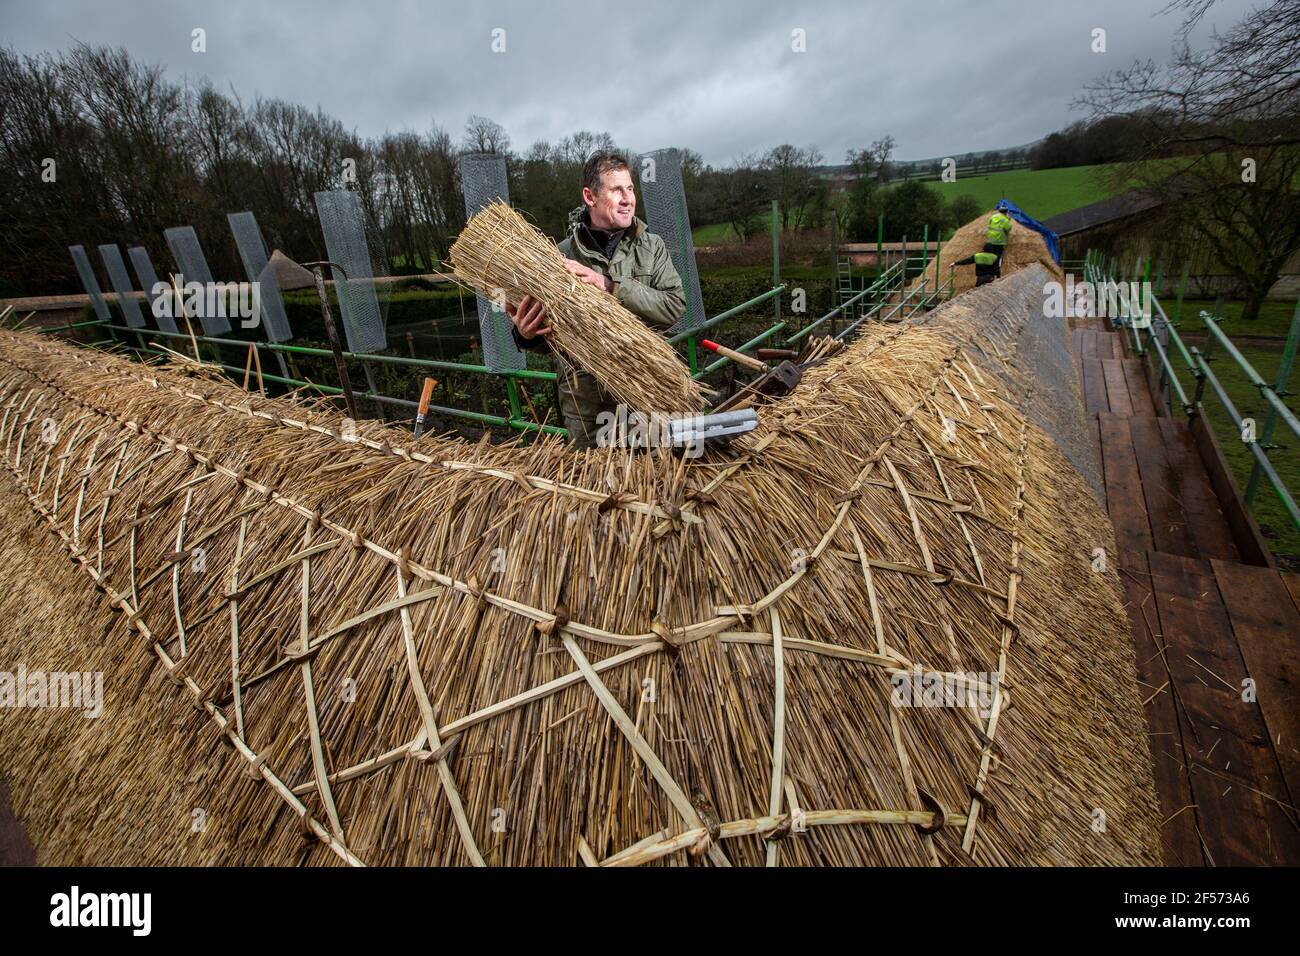 Master Thatcher, Adam Nash professional roof thatcher fits 'Hazel Spars' to fix coat work and straw on the roof of a walled garden, Wiltshire, England. Stock Photo